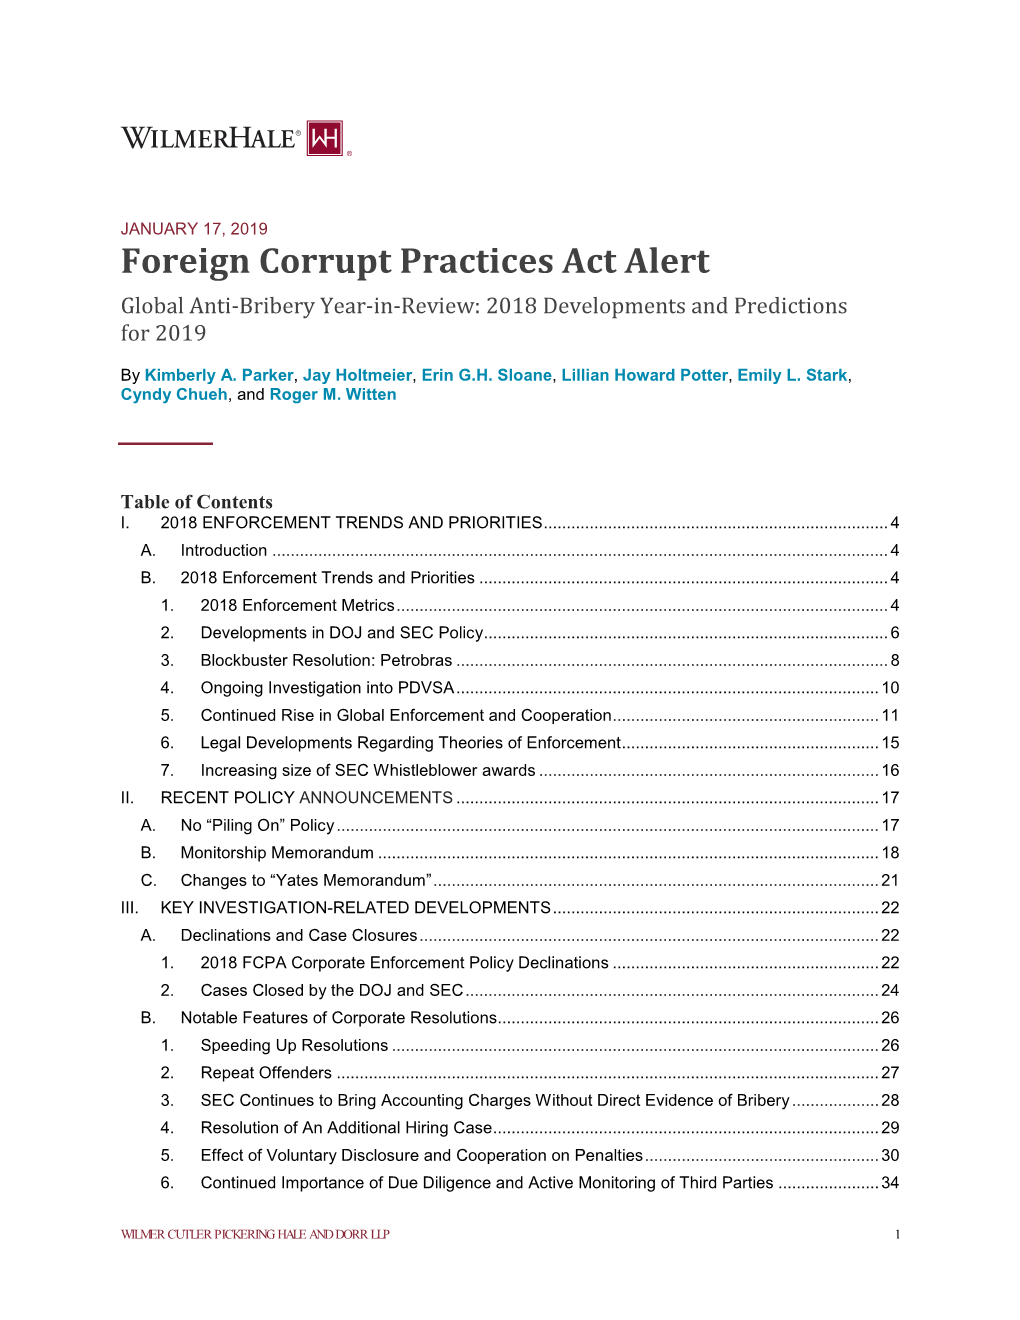 Foreign Corrupt Practices Act Alert Global Anti-Bribery Year-In-Review: 2018 Developments and Predictions for 2019